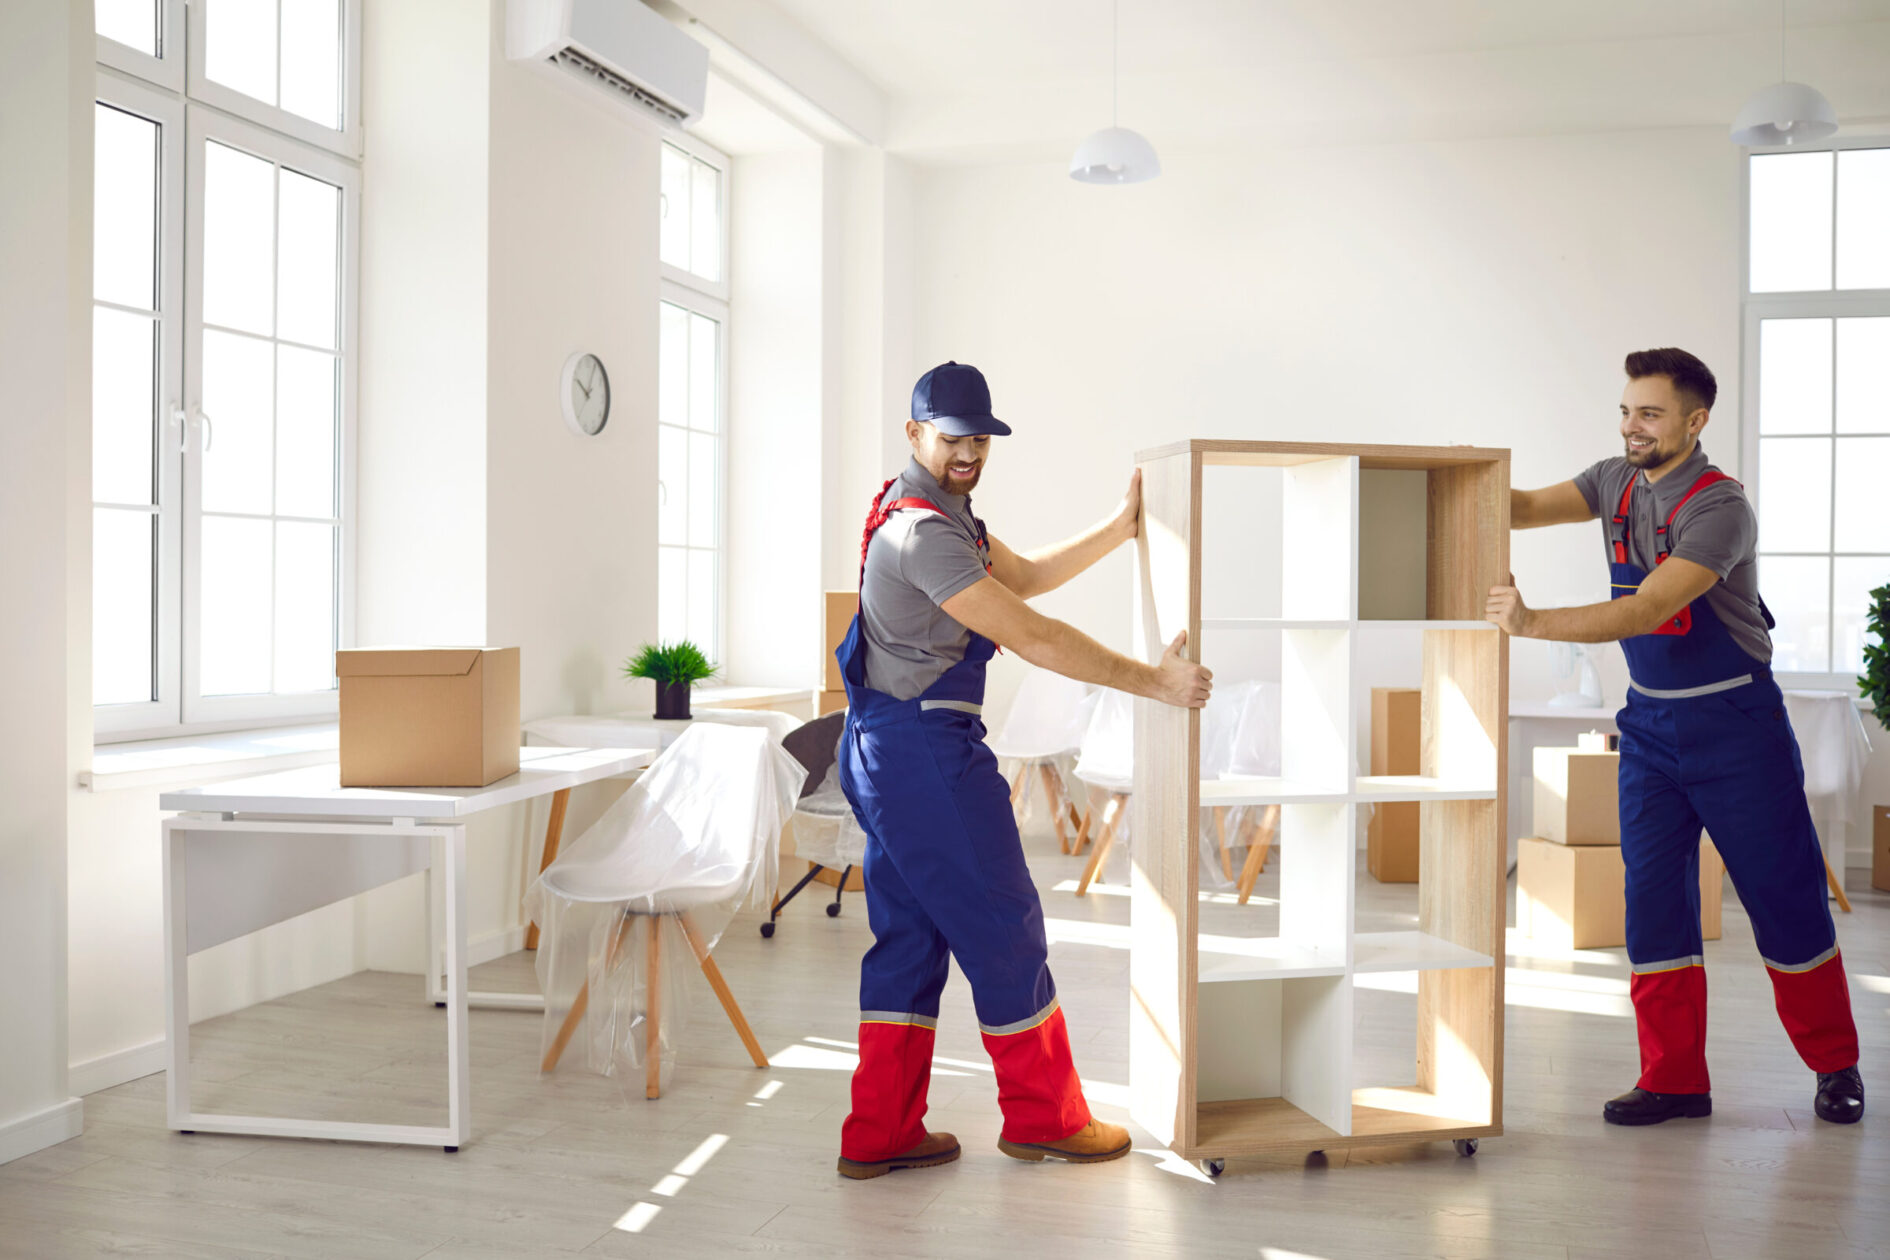 Making sure your office space is clear of any obstacles and old furniture will ease the installation process.